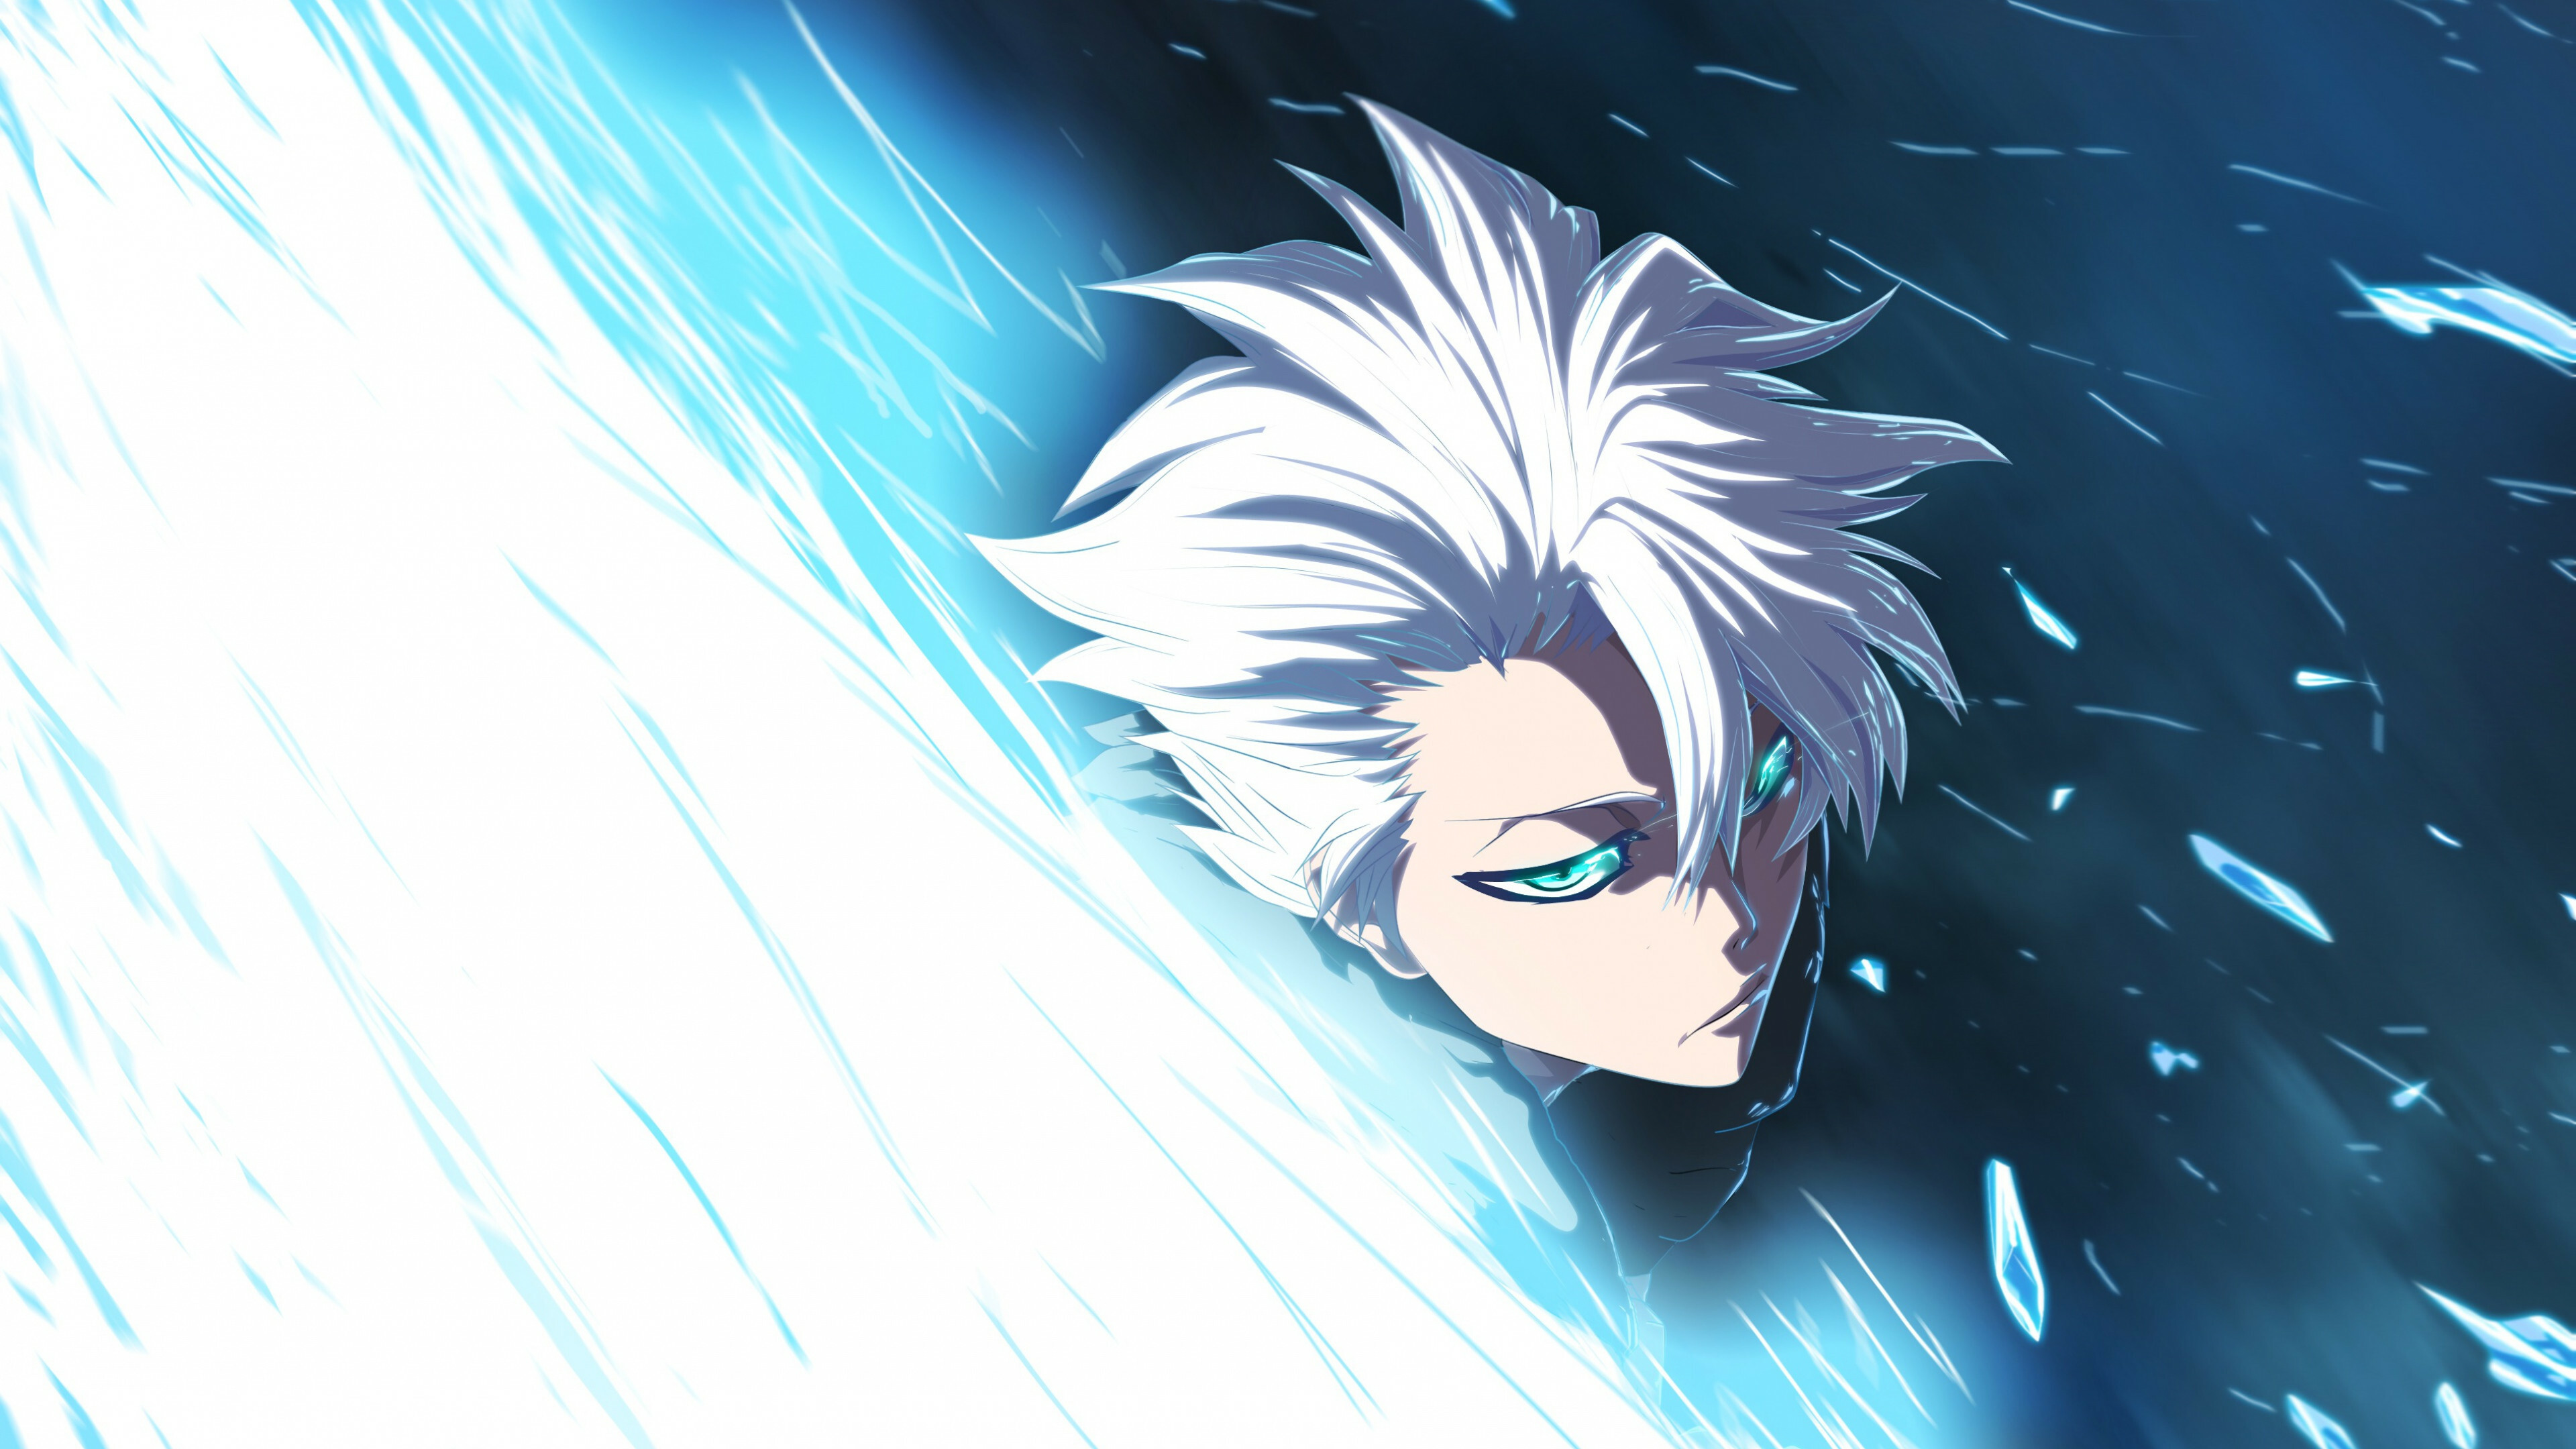 Bleach: Toshiro Hitsugaya, formerly served as the 3rd Seat of the 10th Division under Isshin Shiba. 3840x2160 4K Background.